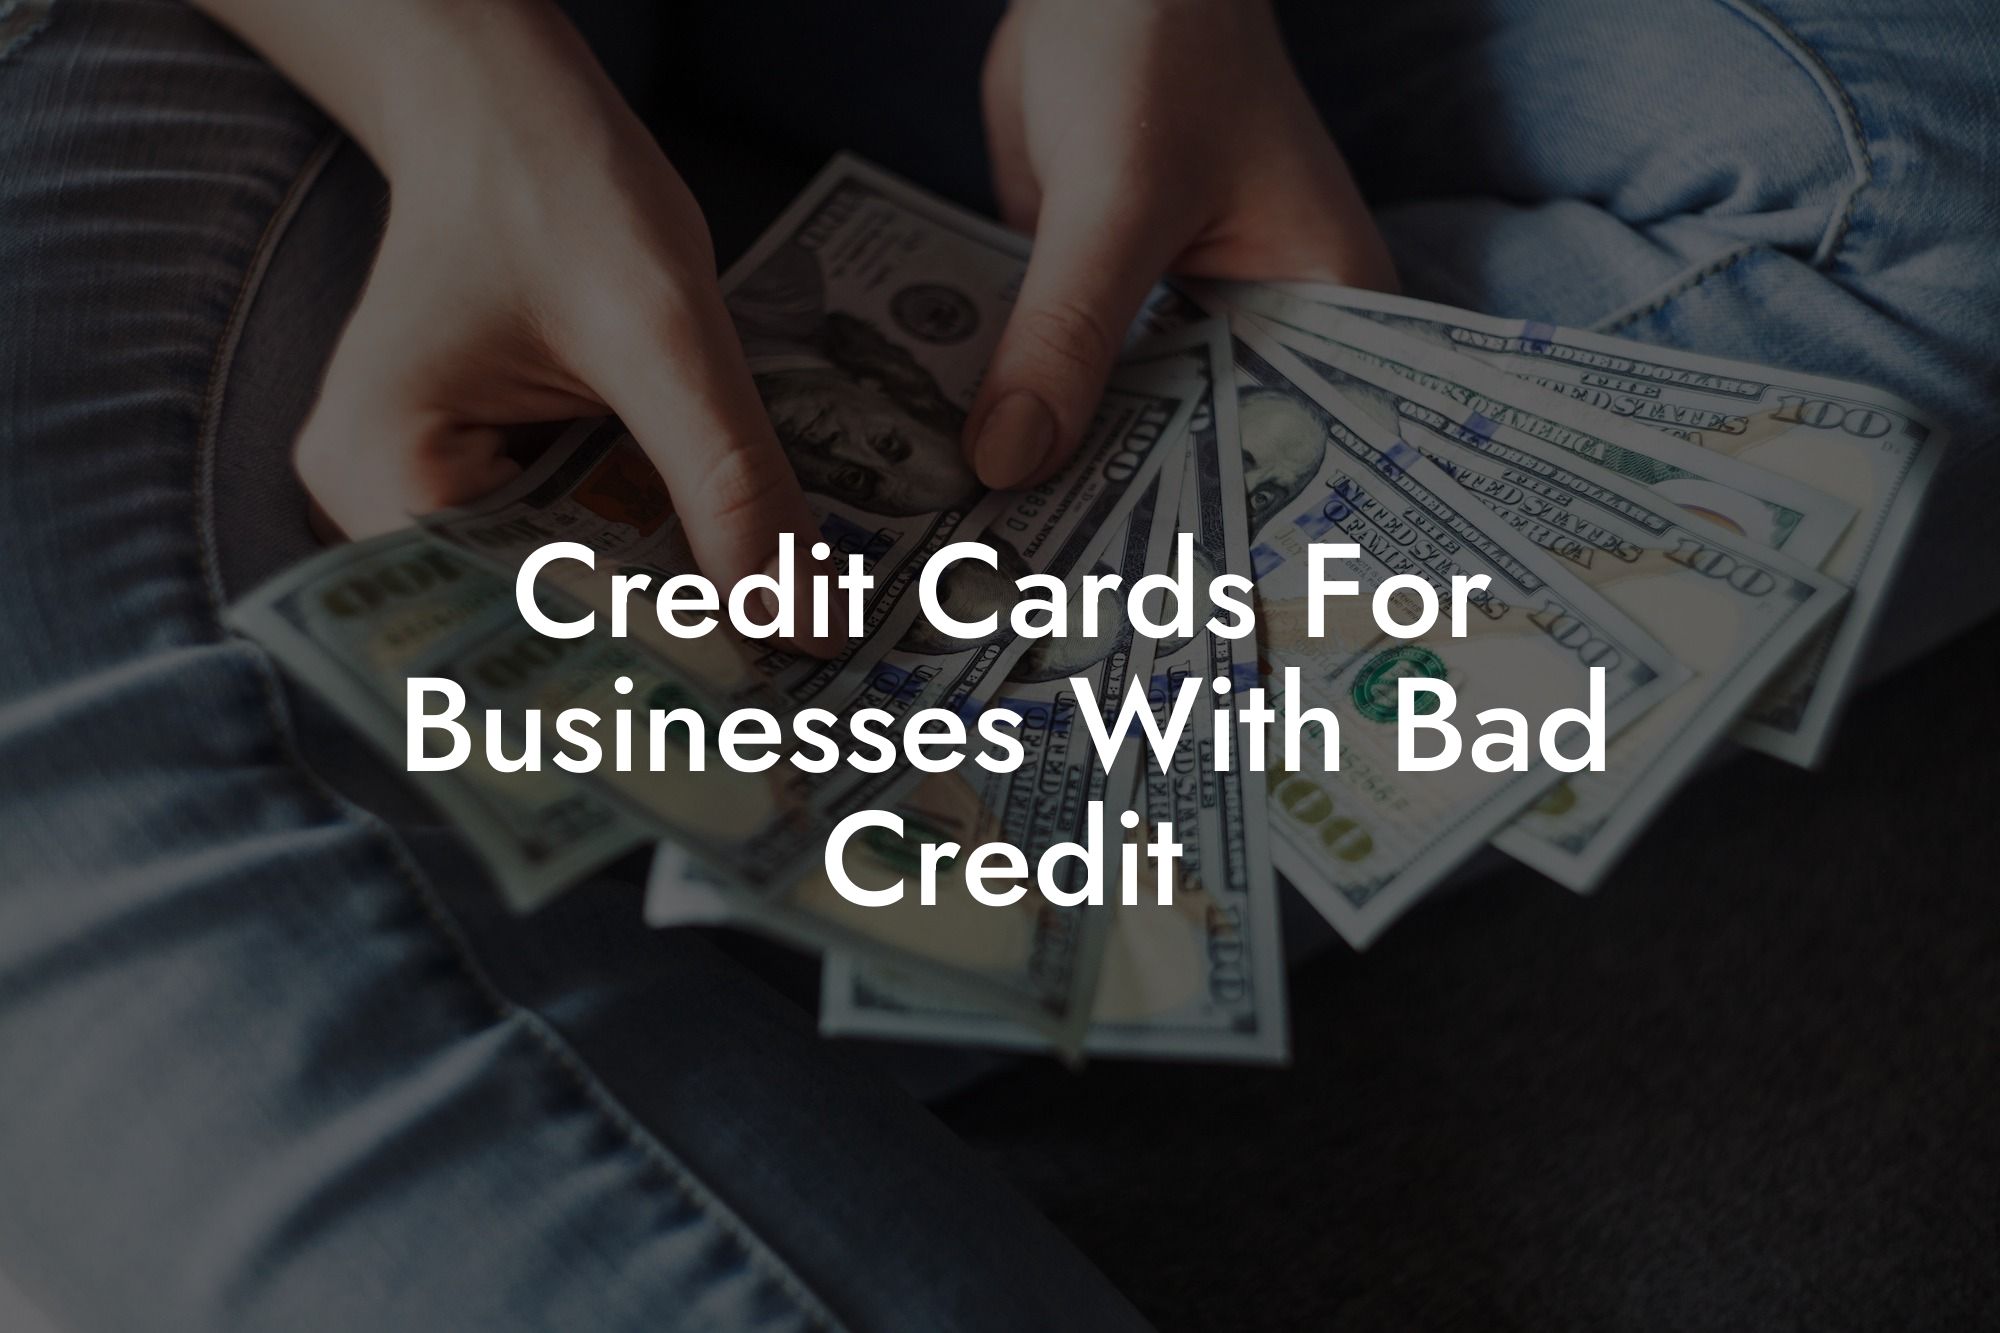 Credit Cards For Businesses With Bad Credit